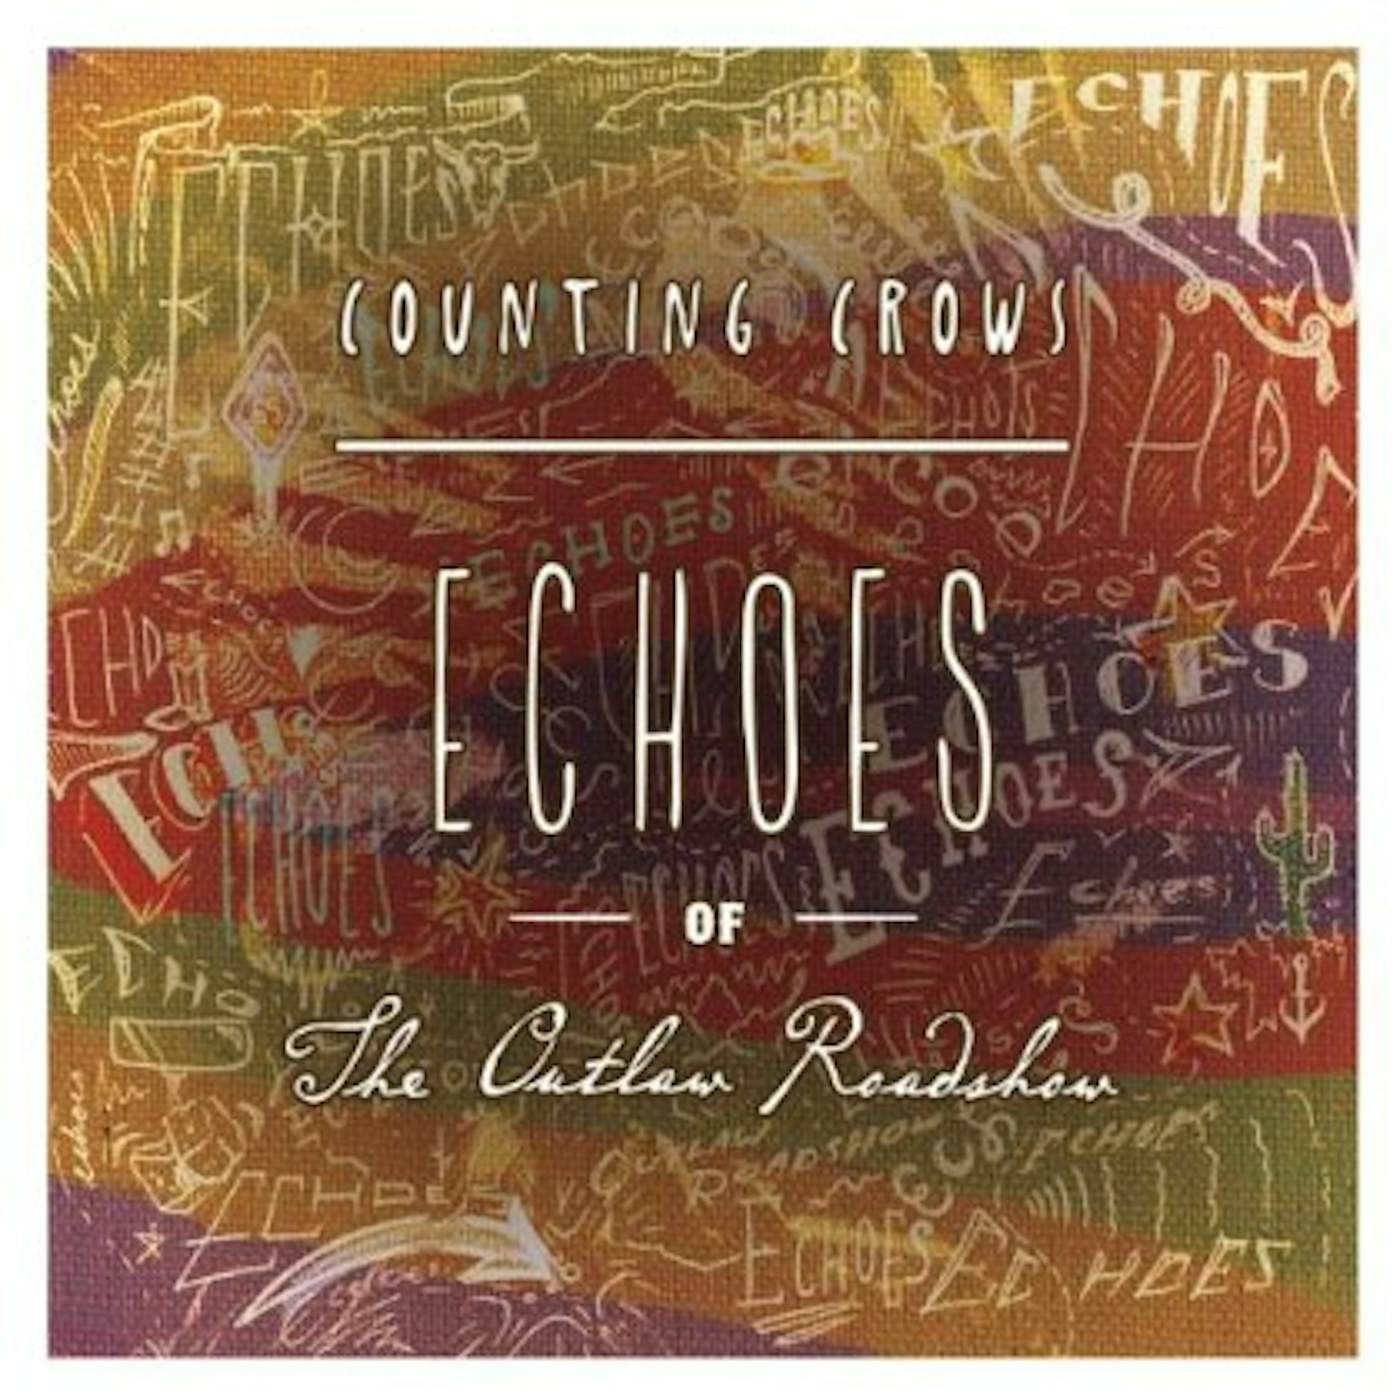 Counting Crows ECHOES OF THE OUTLAW ROADSHOW CD